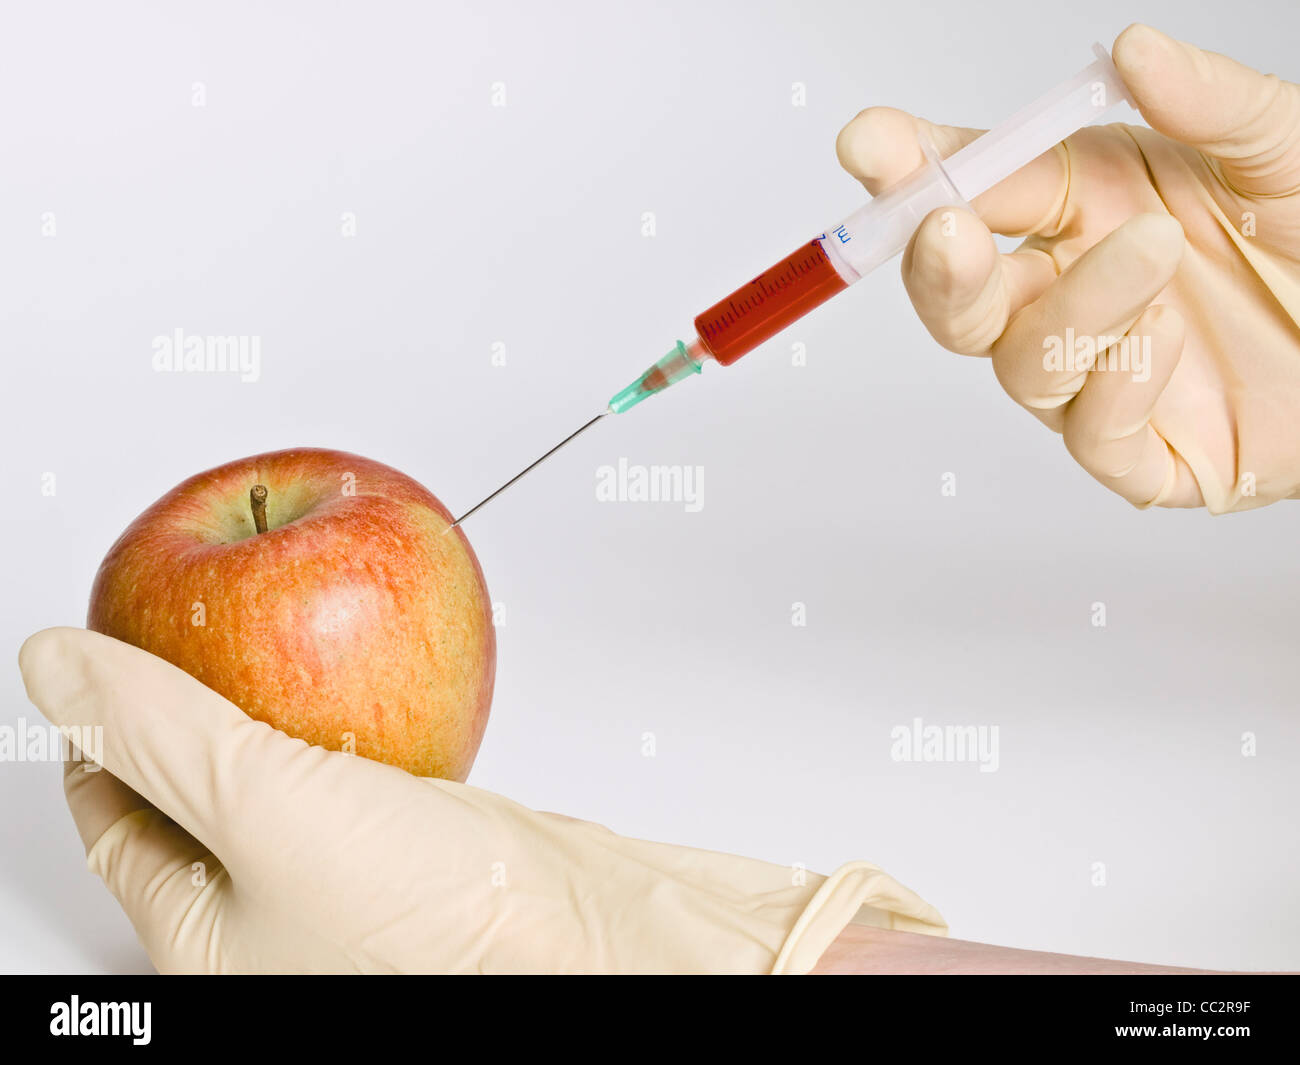 genetic engineering, a liquid is injected into an apple. Stock Photo